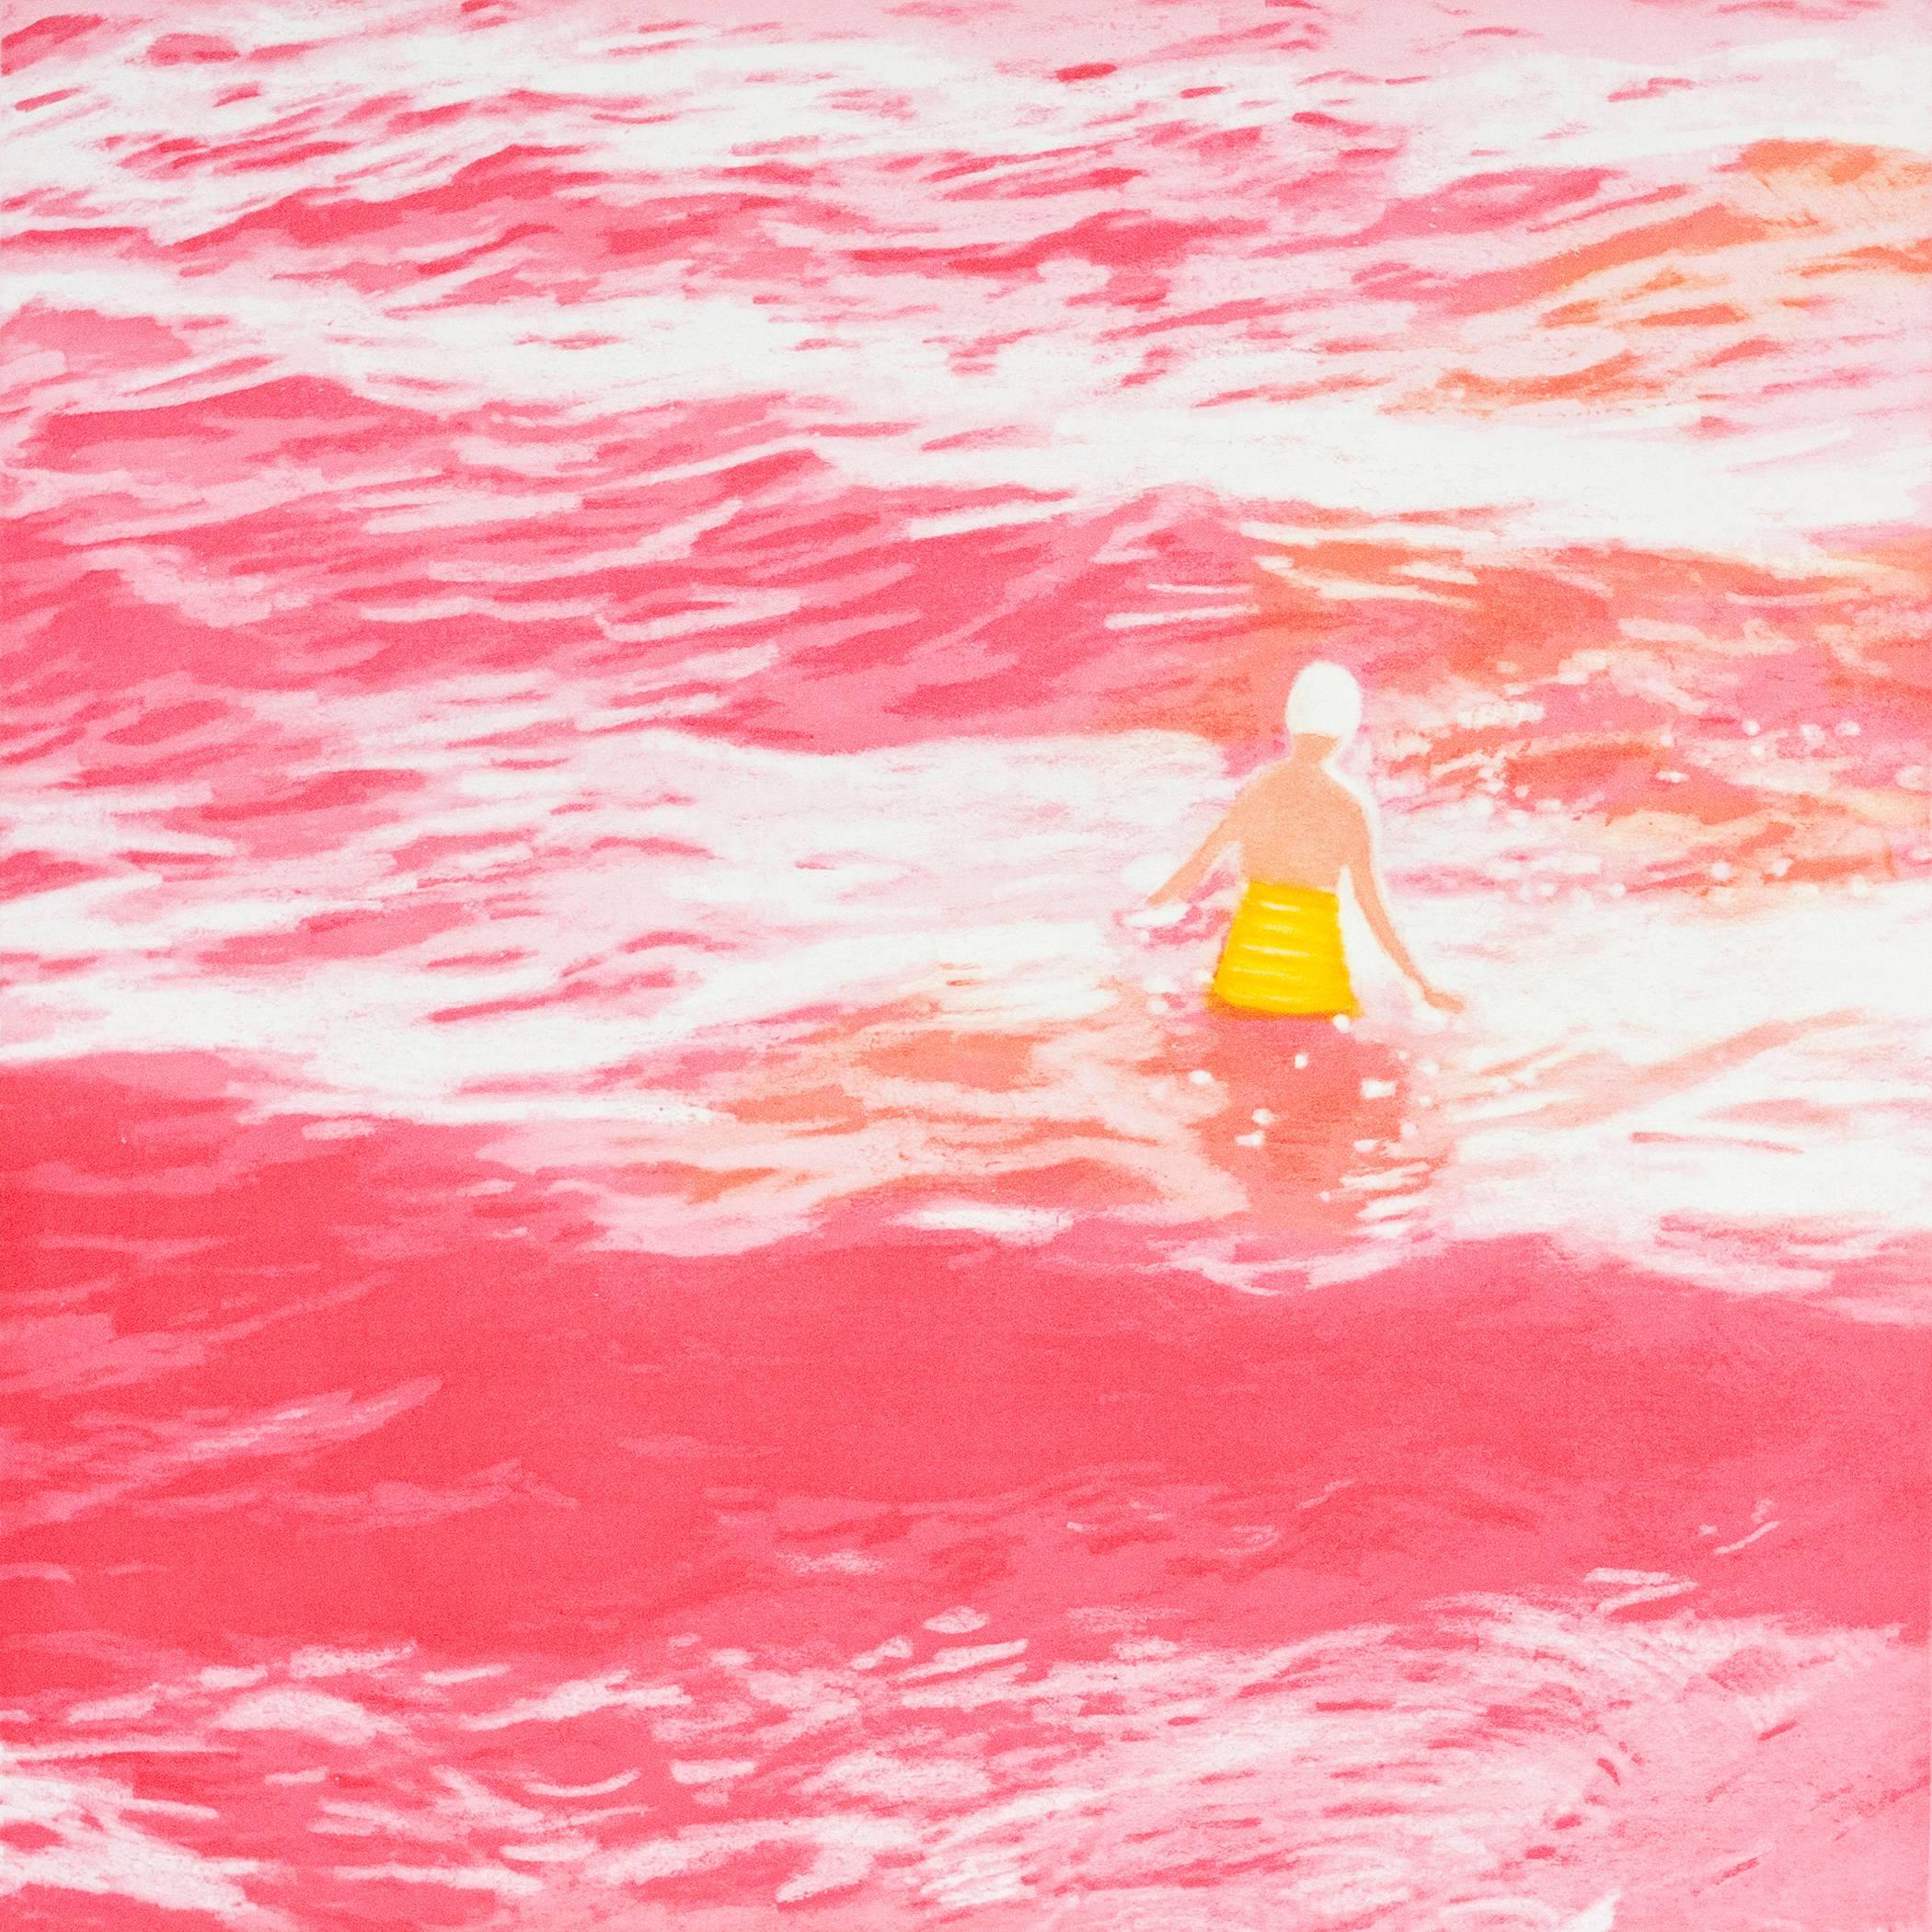 Wading II (Pink) - Print by Isca Greenfield-Sanders